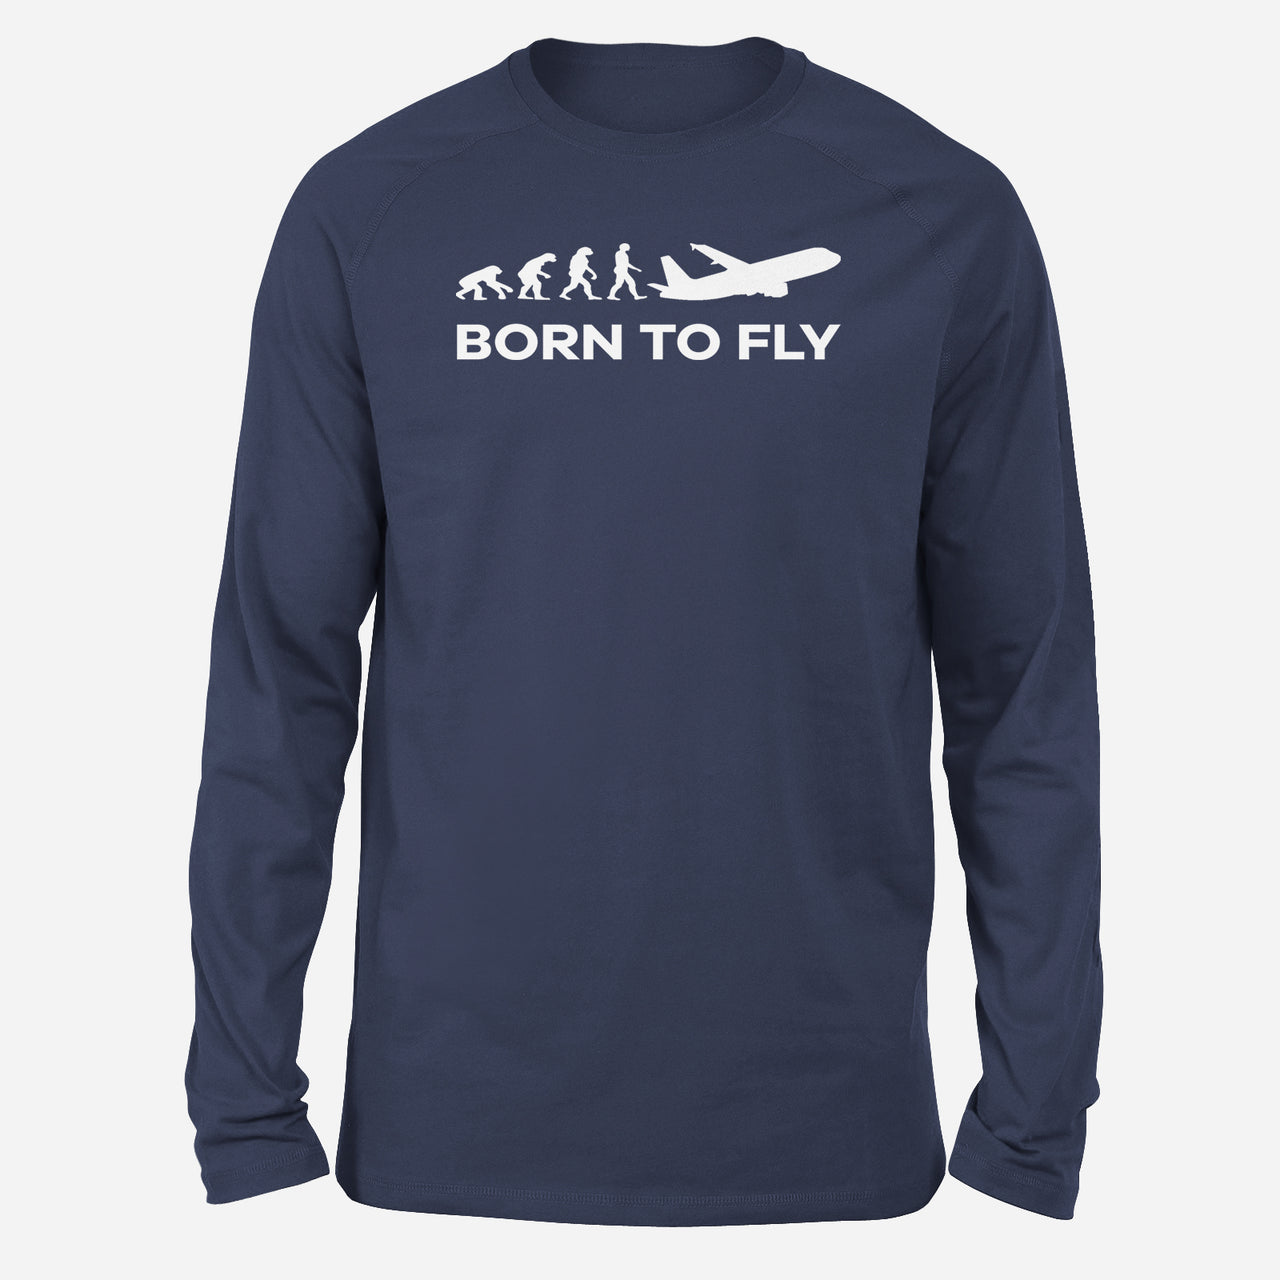 Born To Fly Designed Long-Sleeve T-Shirts